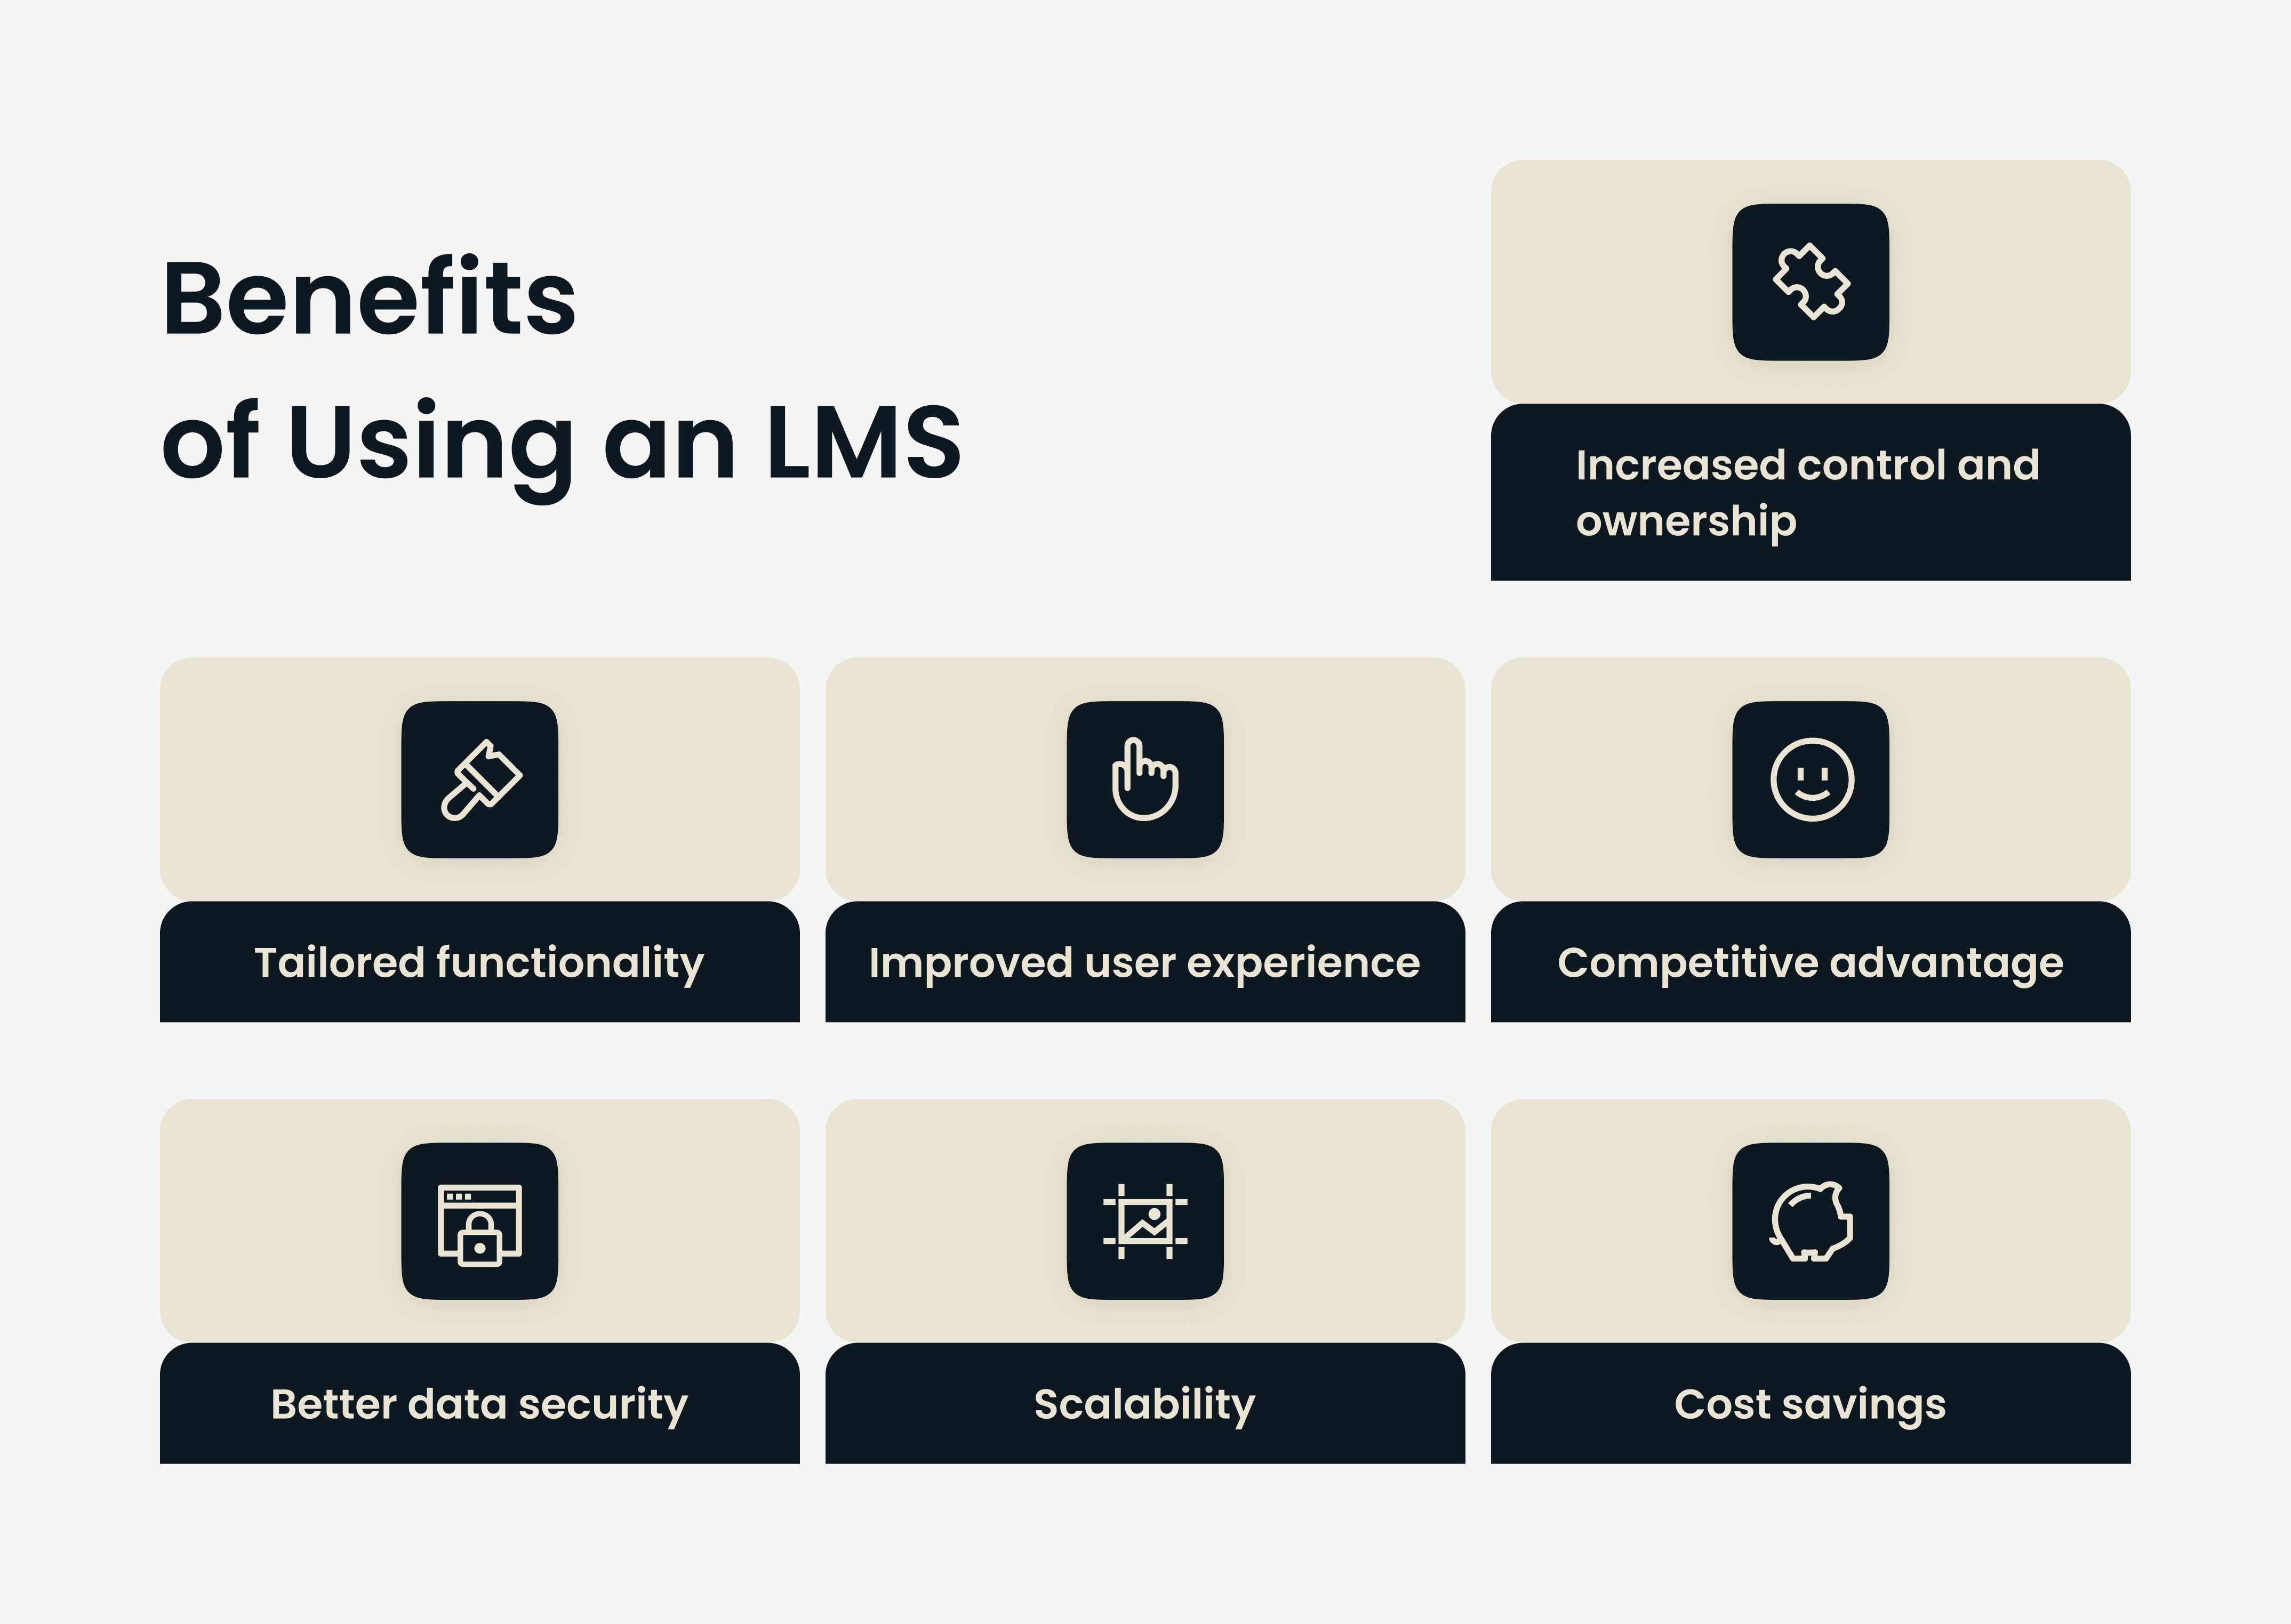 Custom LMS features include gamification, reporting and social learning